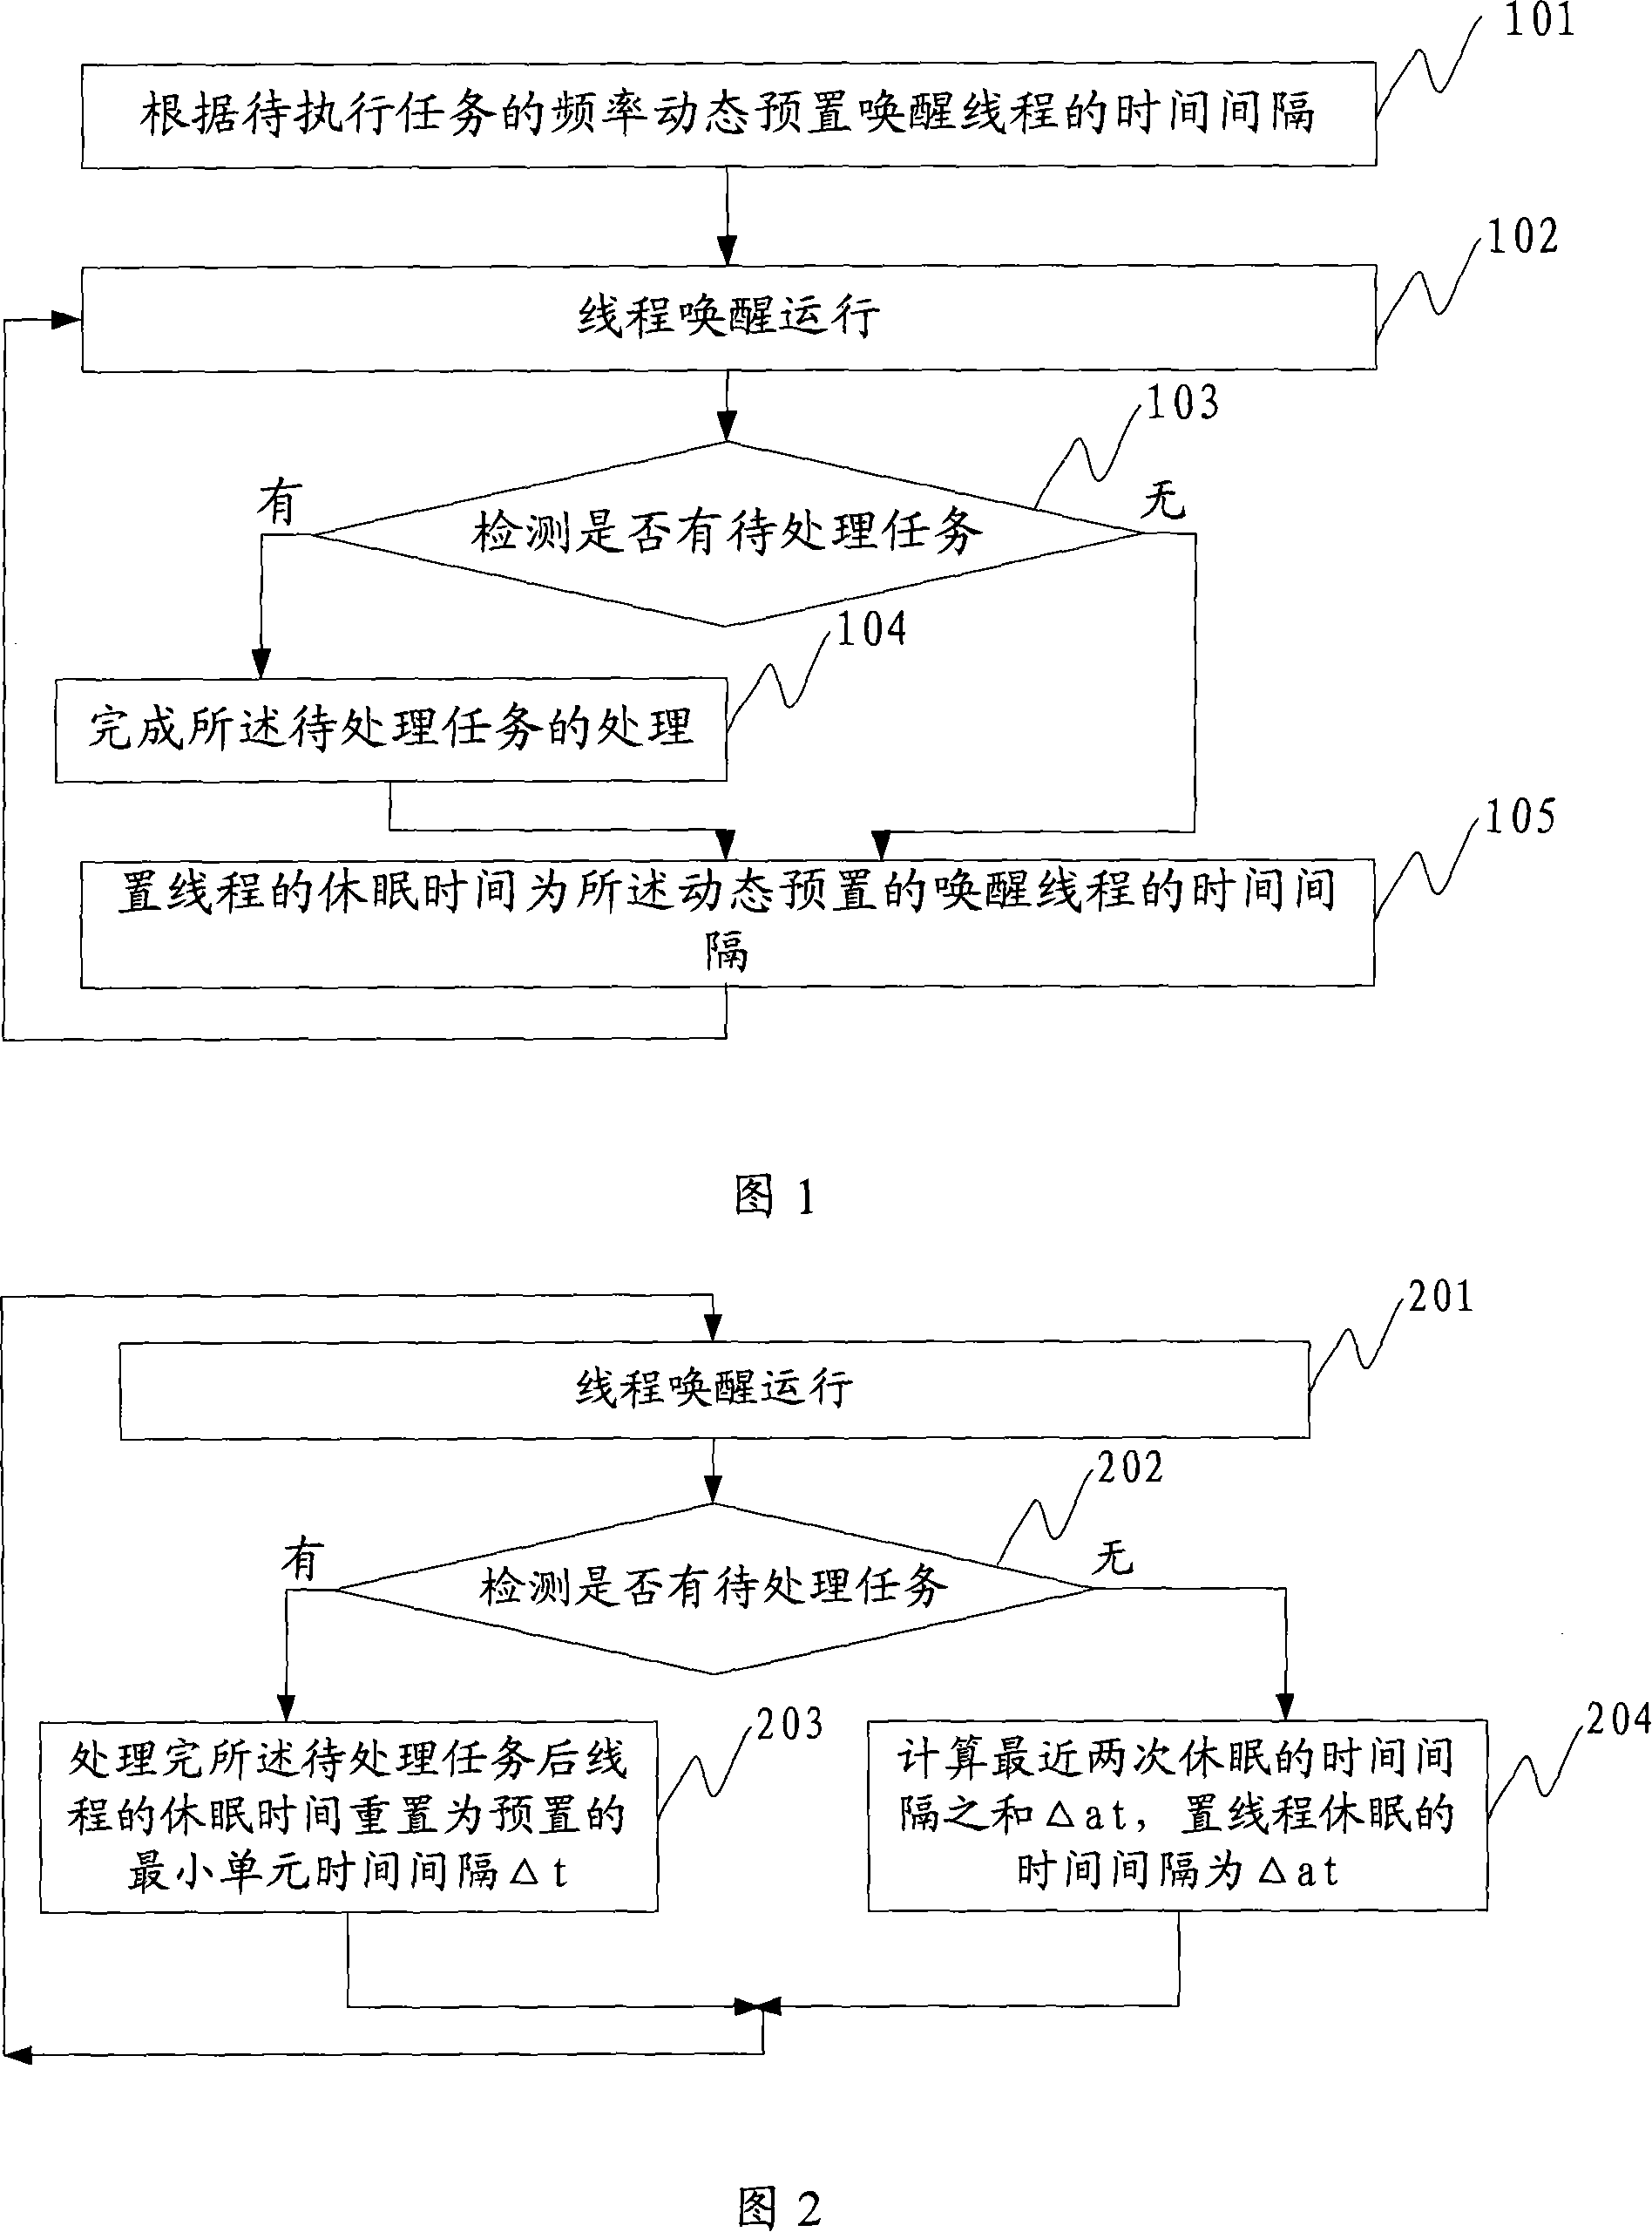 Thread wakening control systems and method